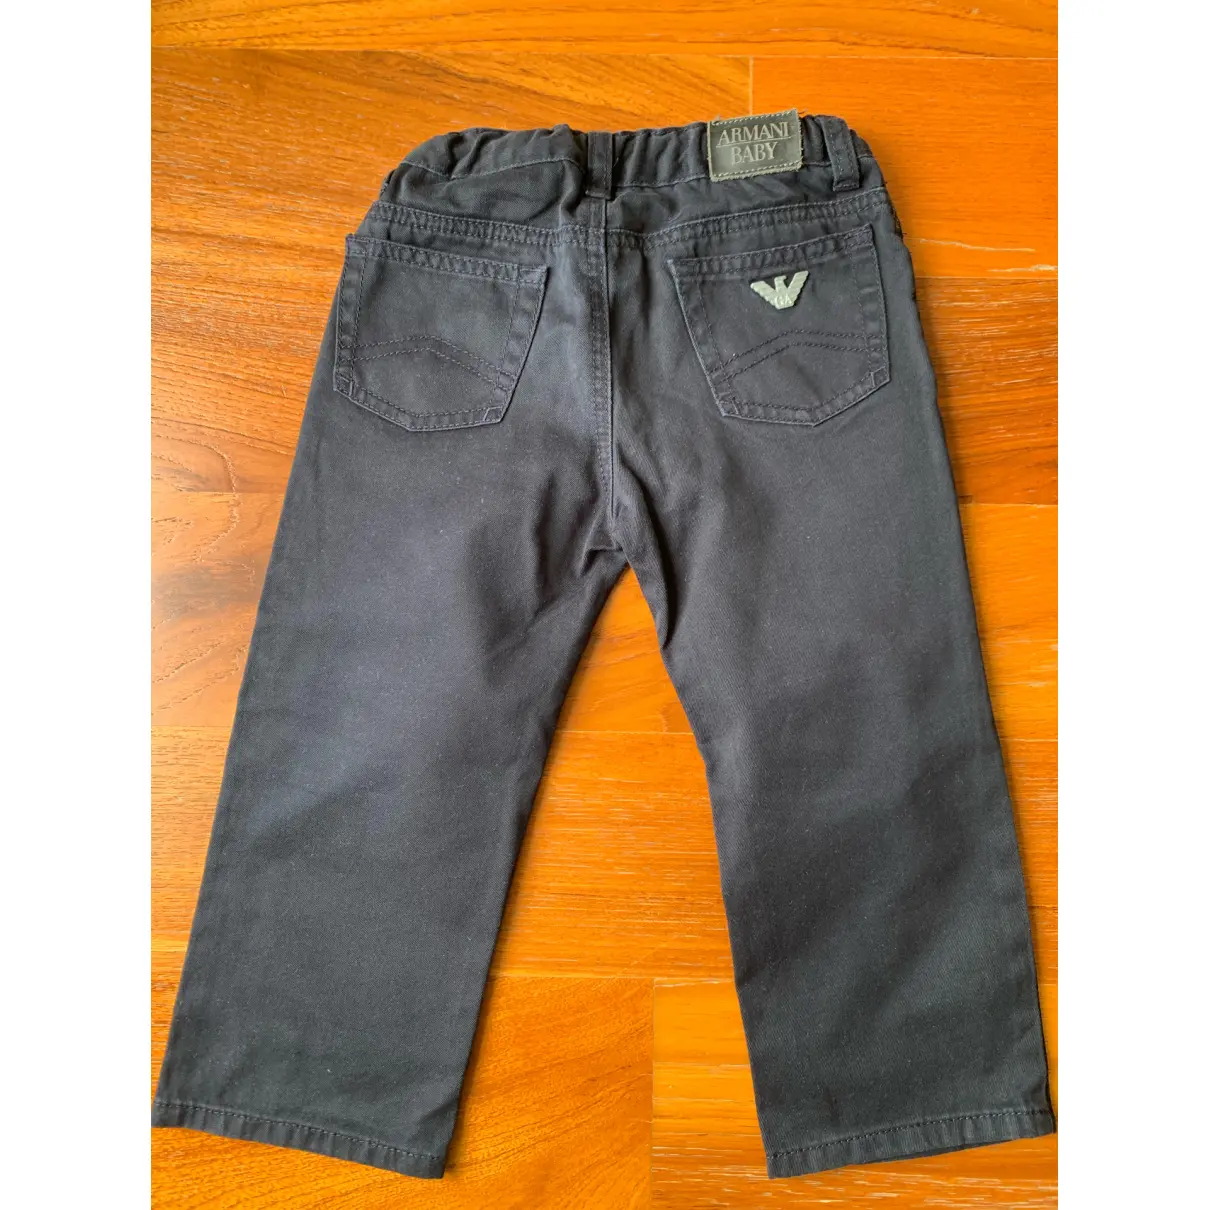 Buy Armani Baby Jeans online